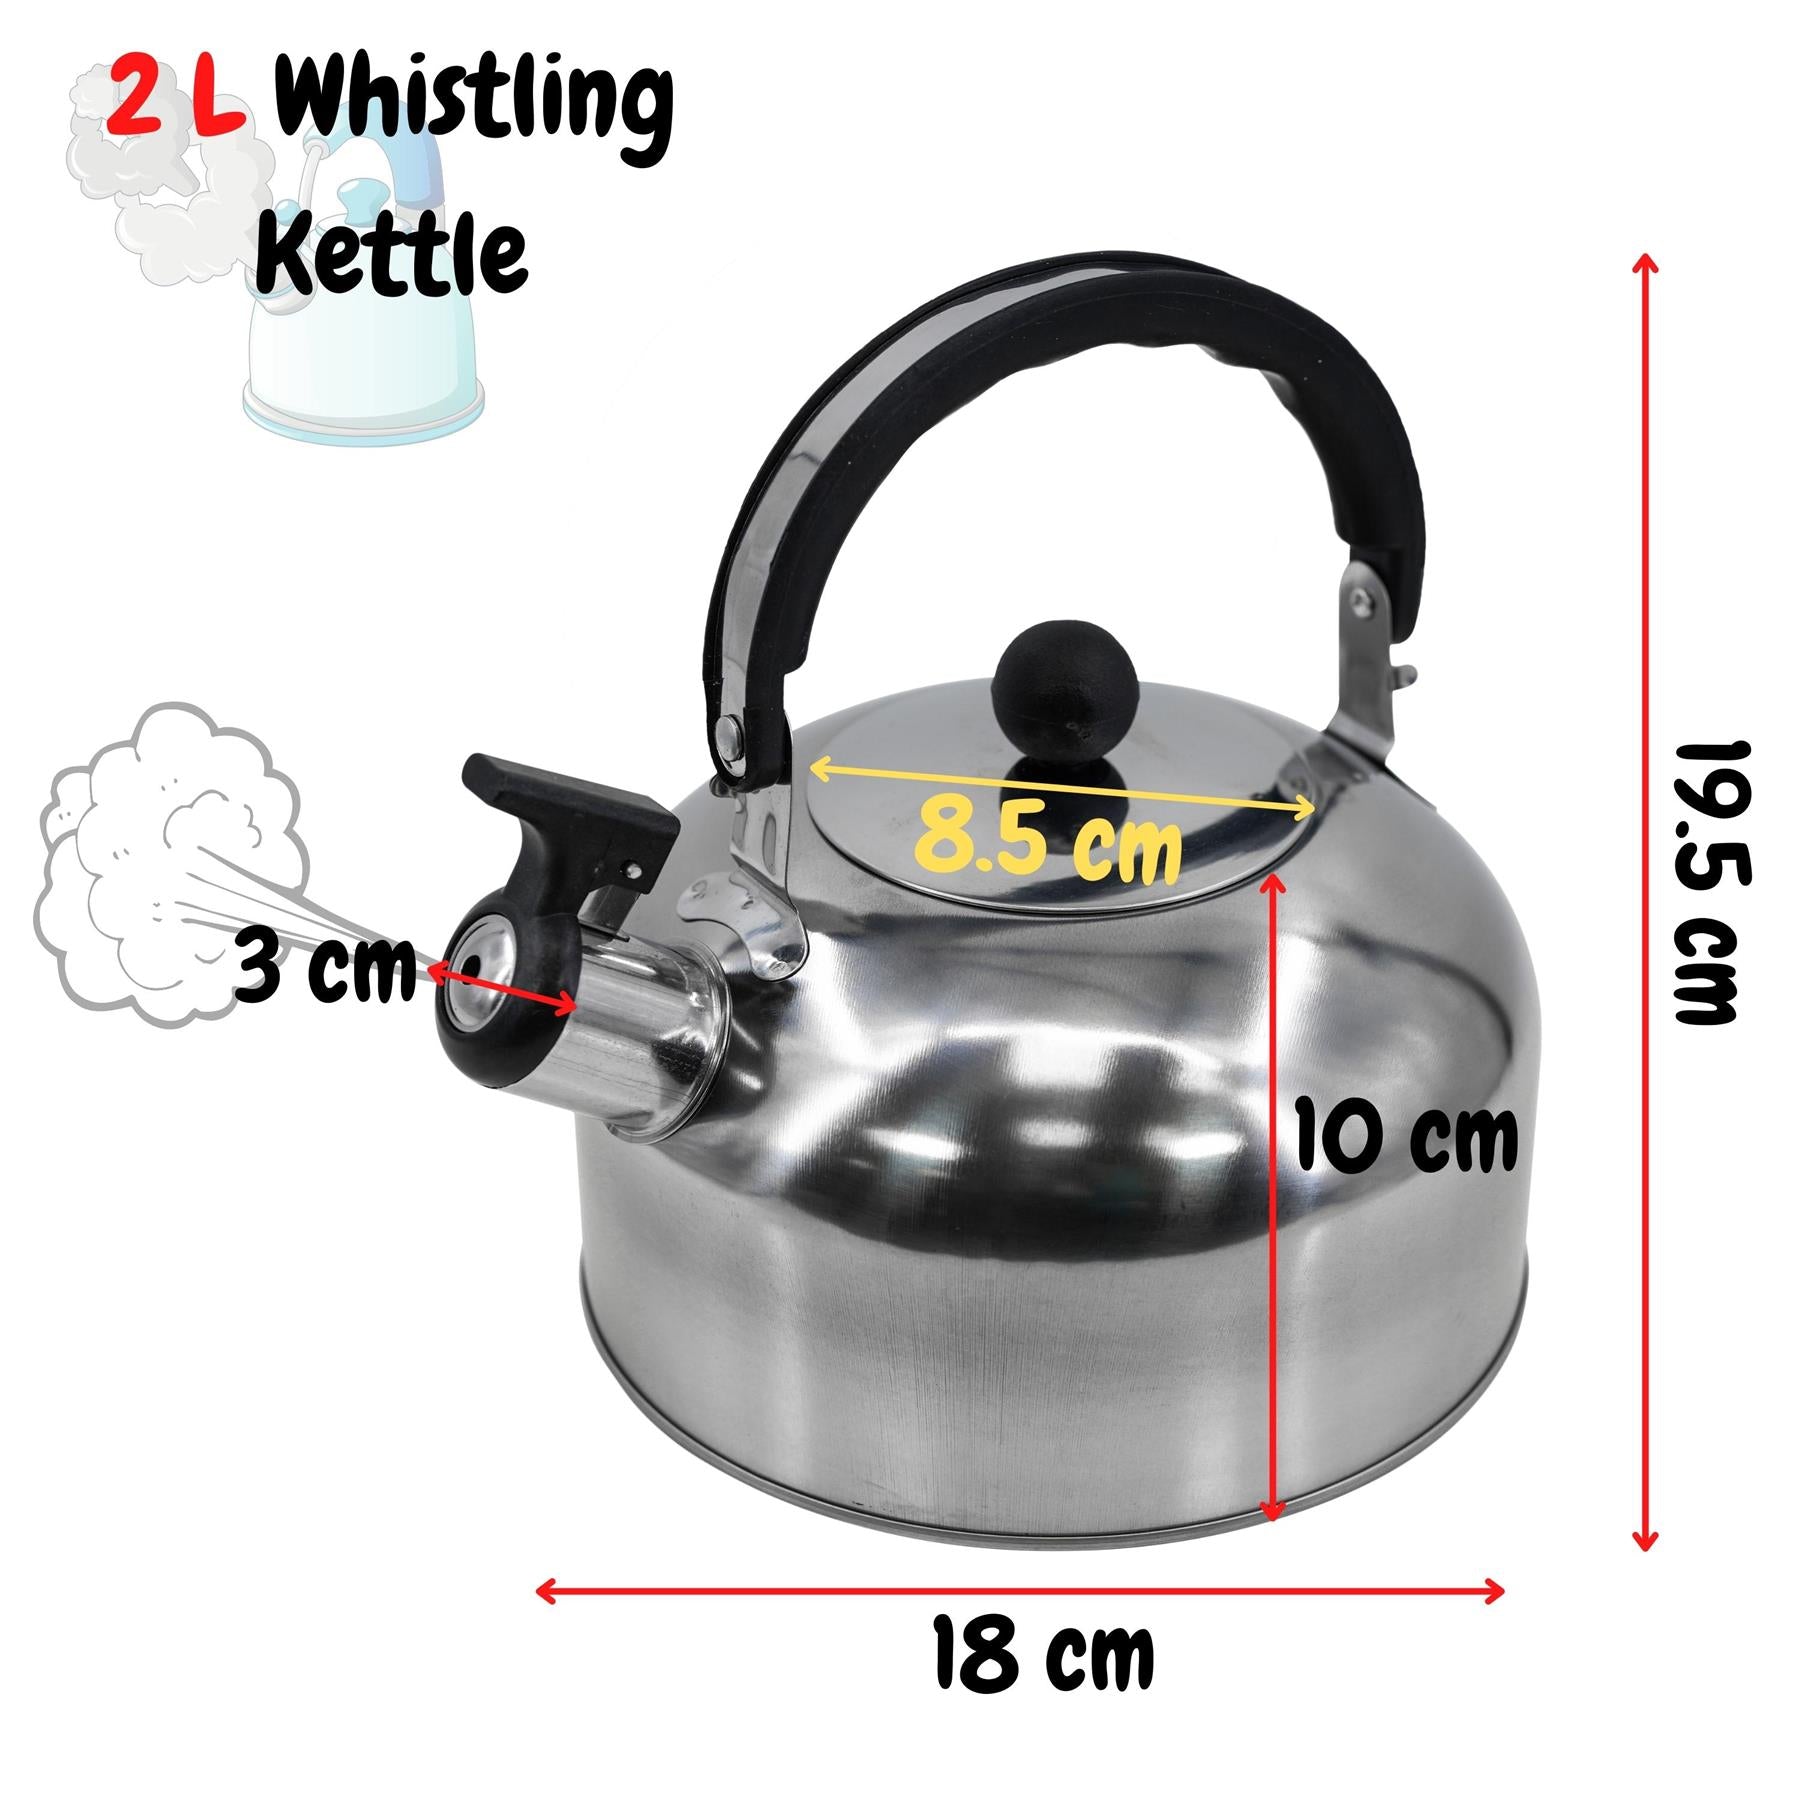 GEEZY kitchen 2 L Stainless Steel Whistling Camping Kettle